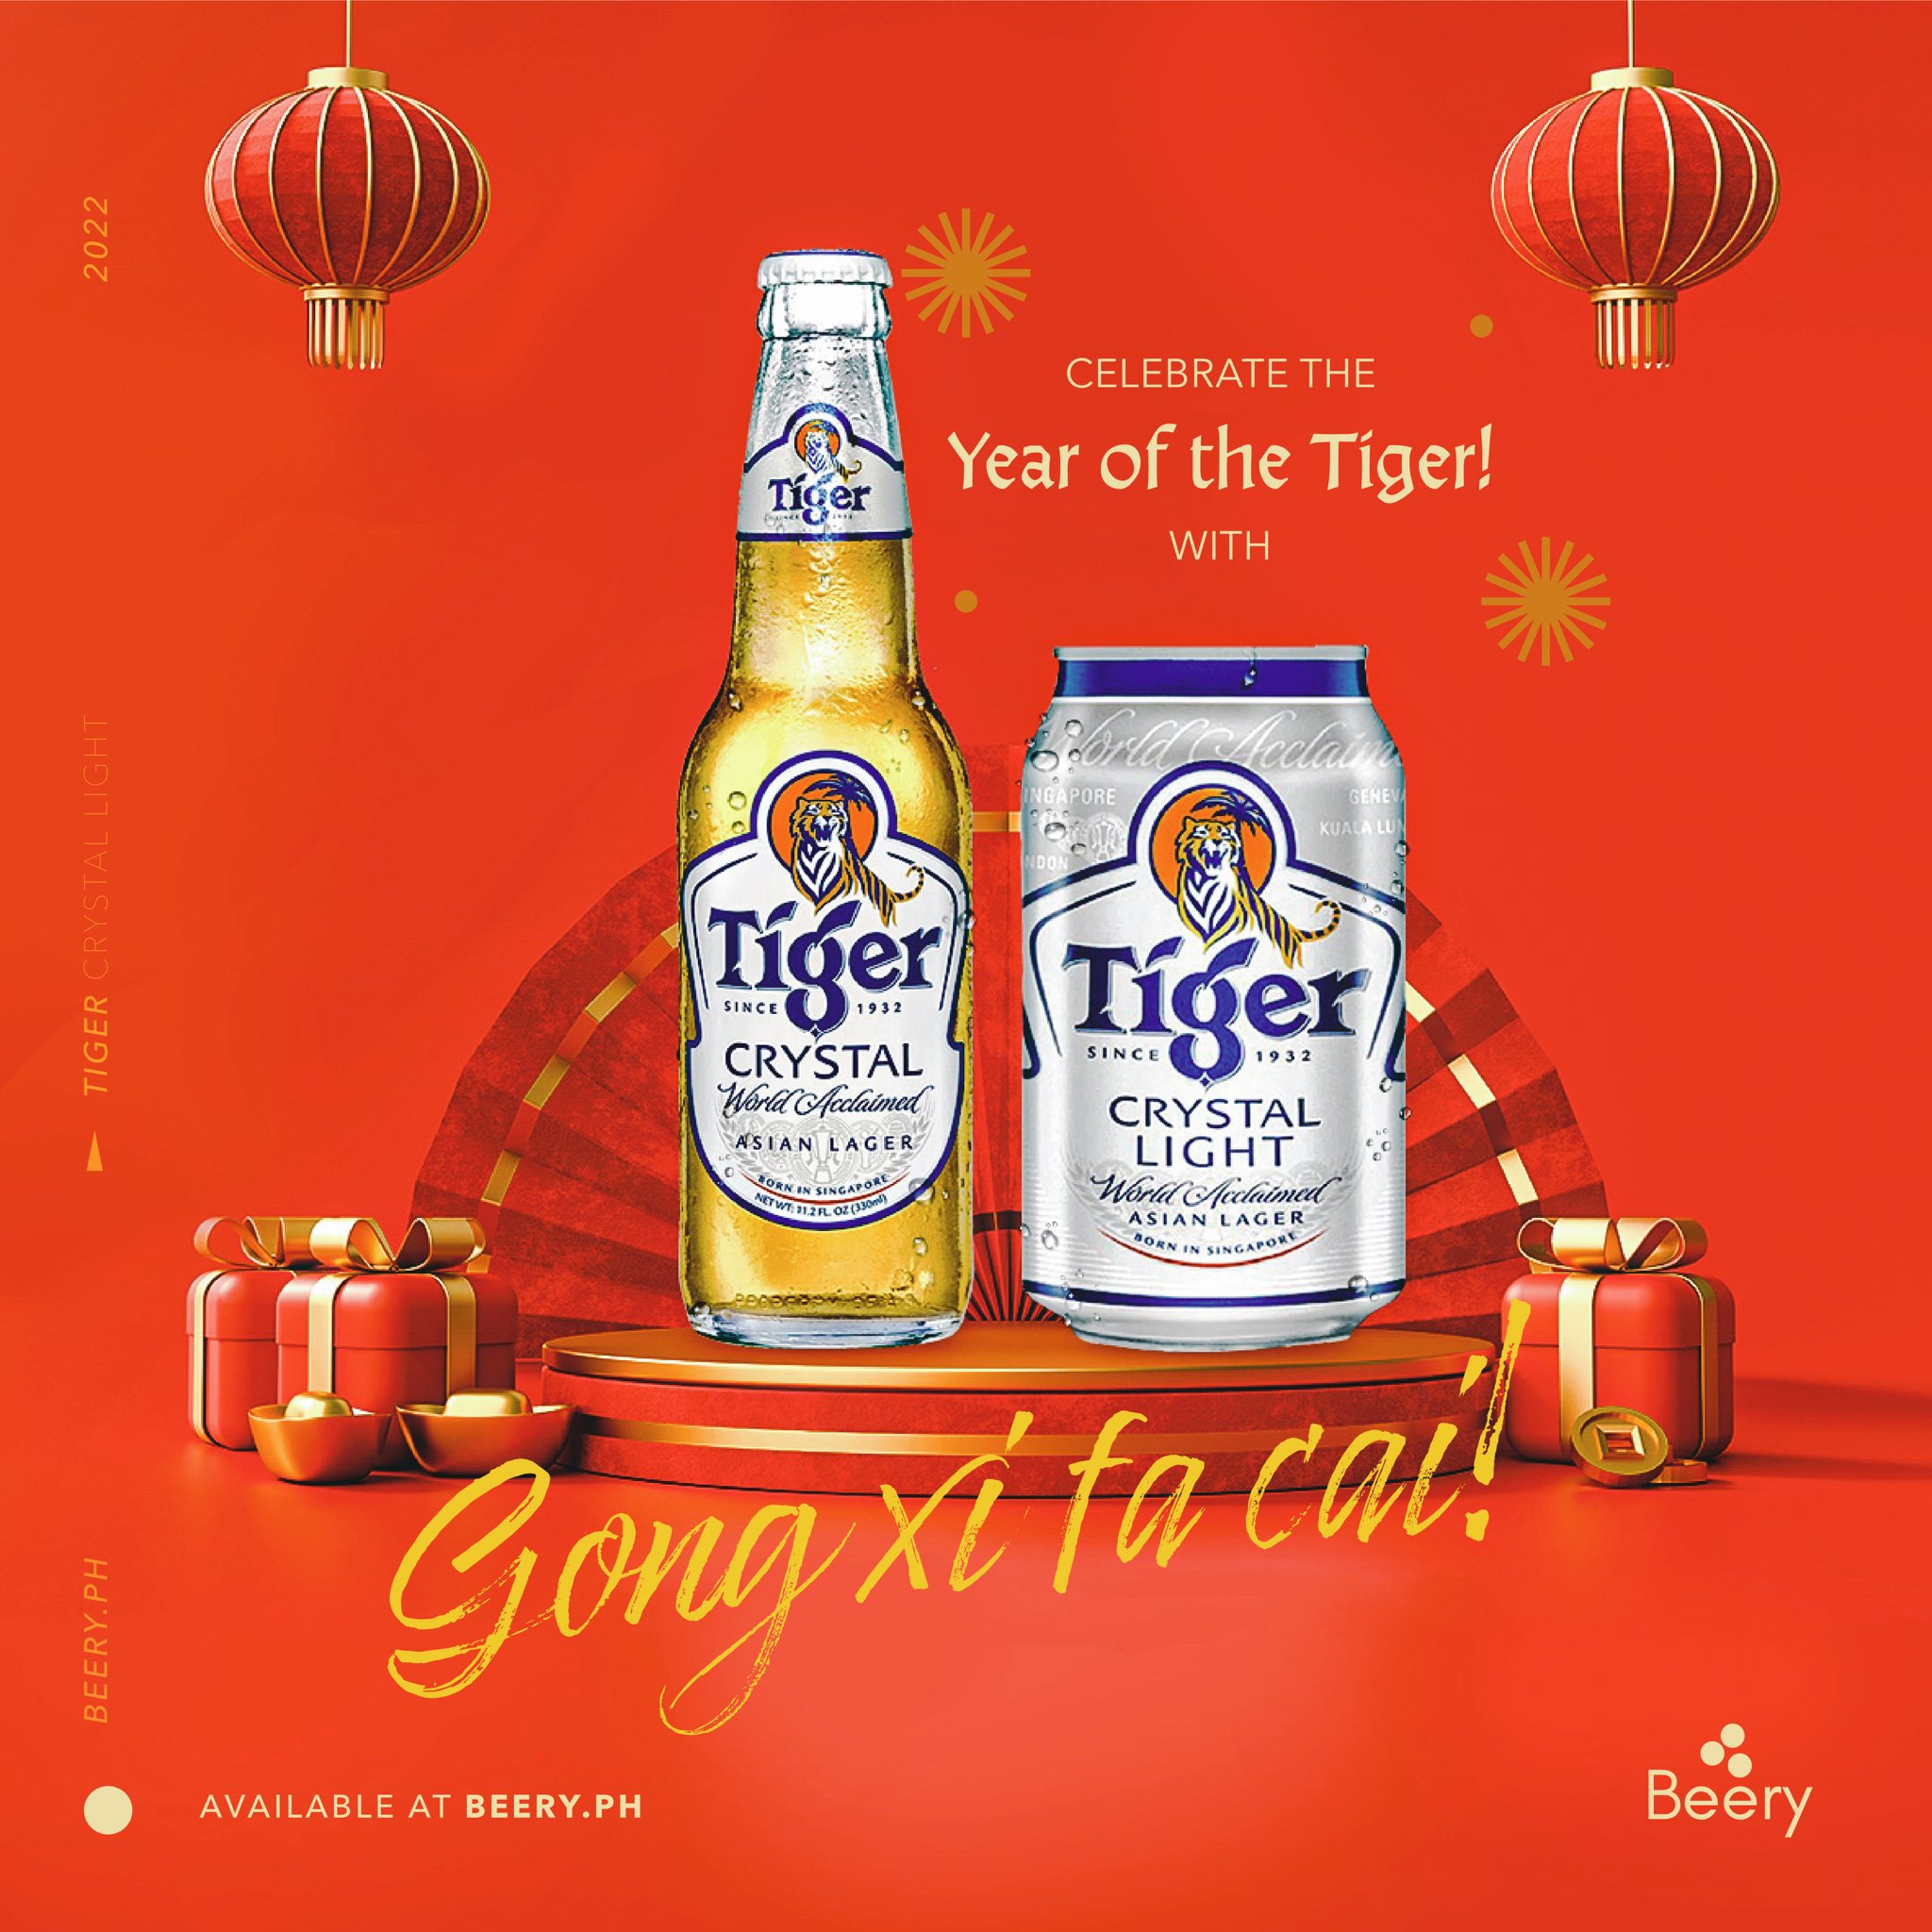 Beery on Twitter: "Happy Lunar New Year! your today and match the special today with Crystal Light Beer!! https://t.co/ZrQ7hCBXJT" / Twitter